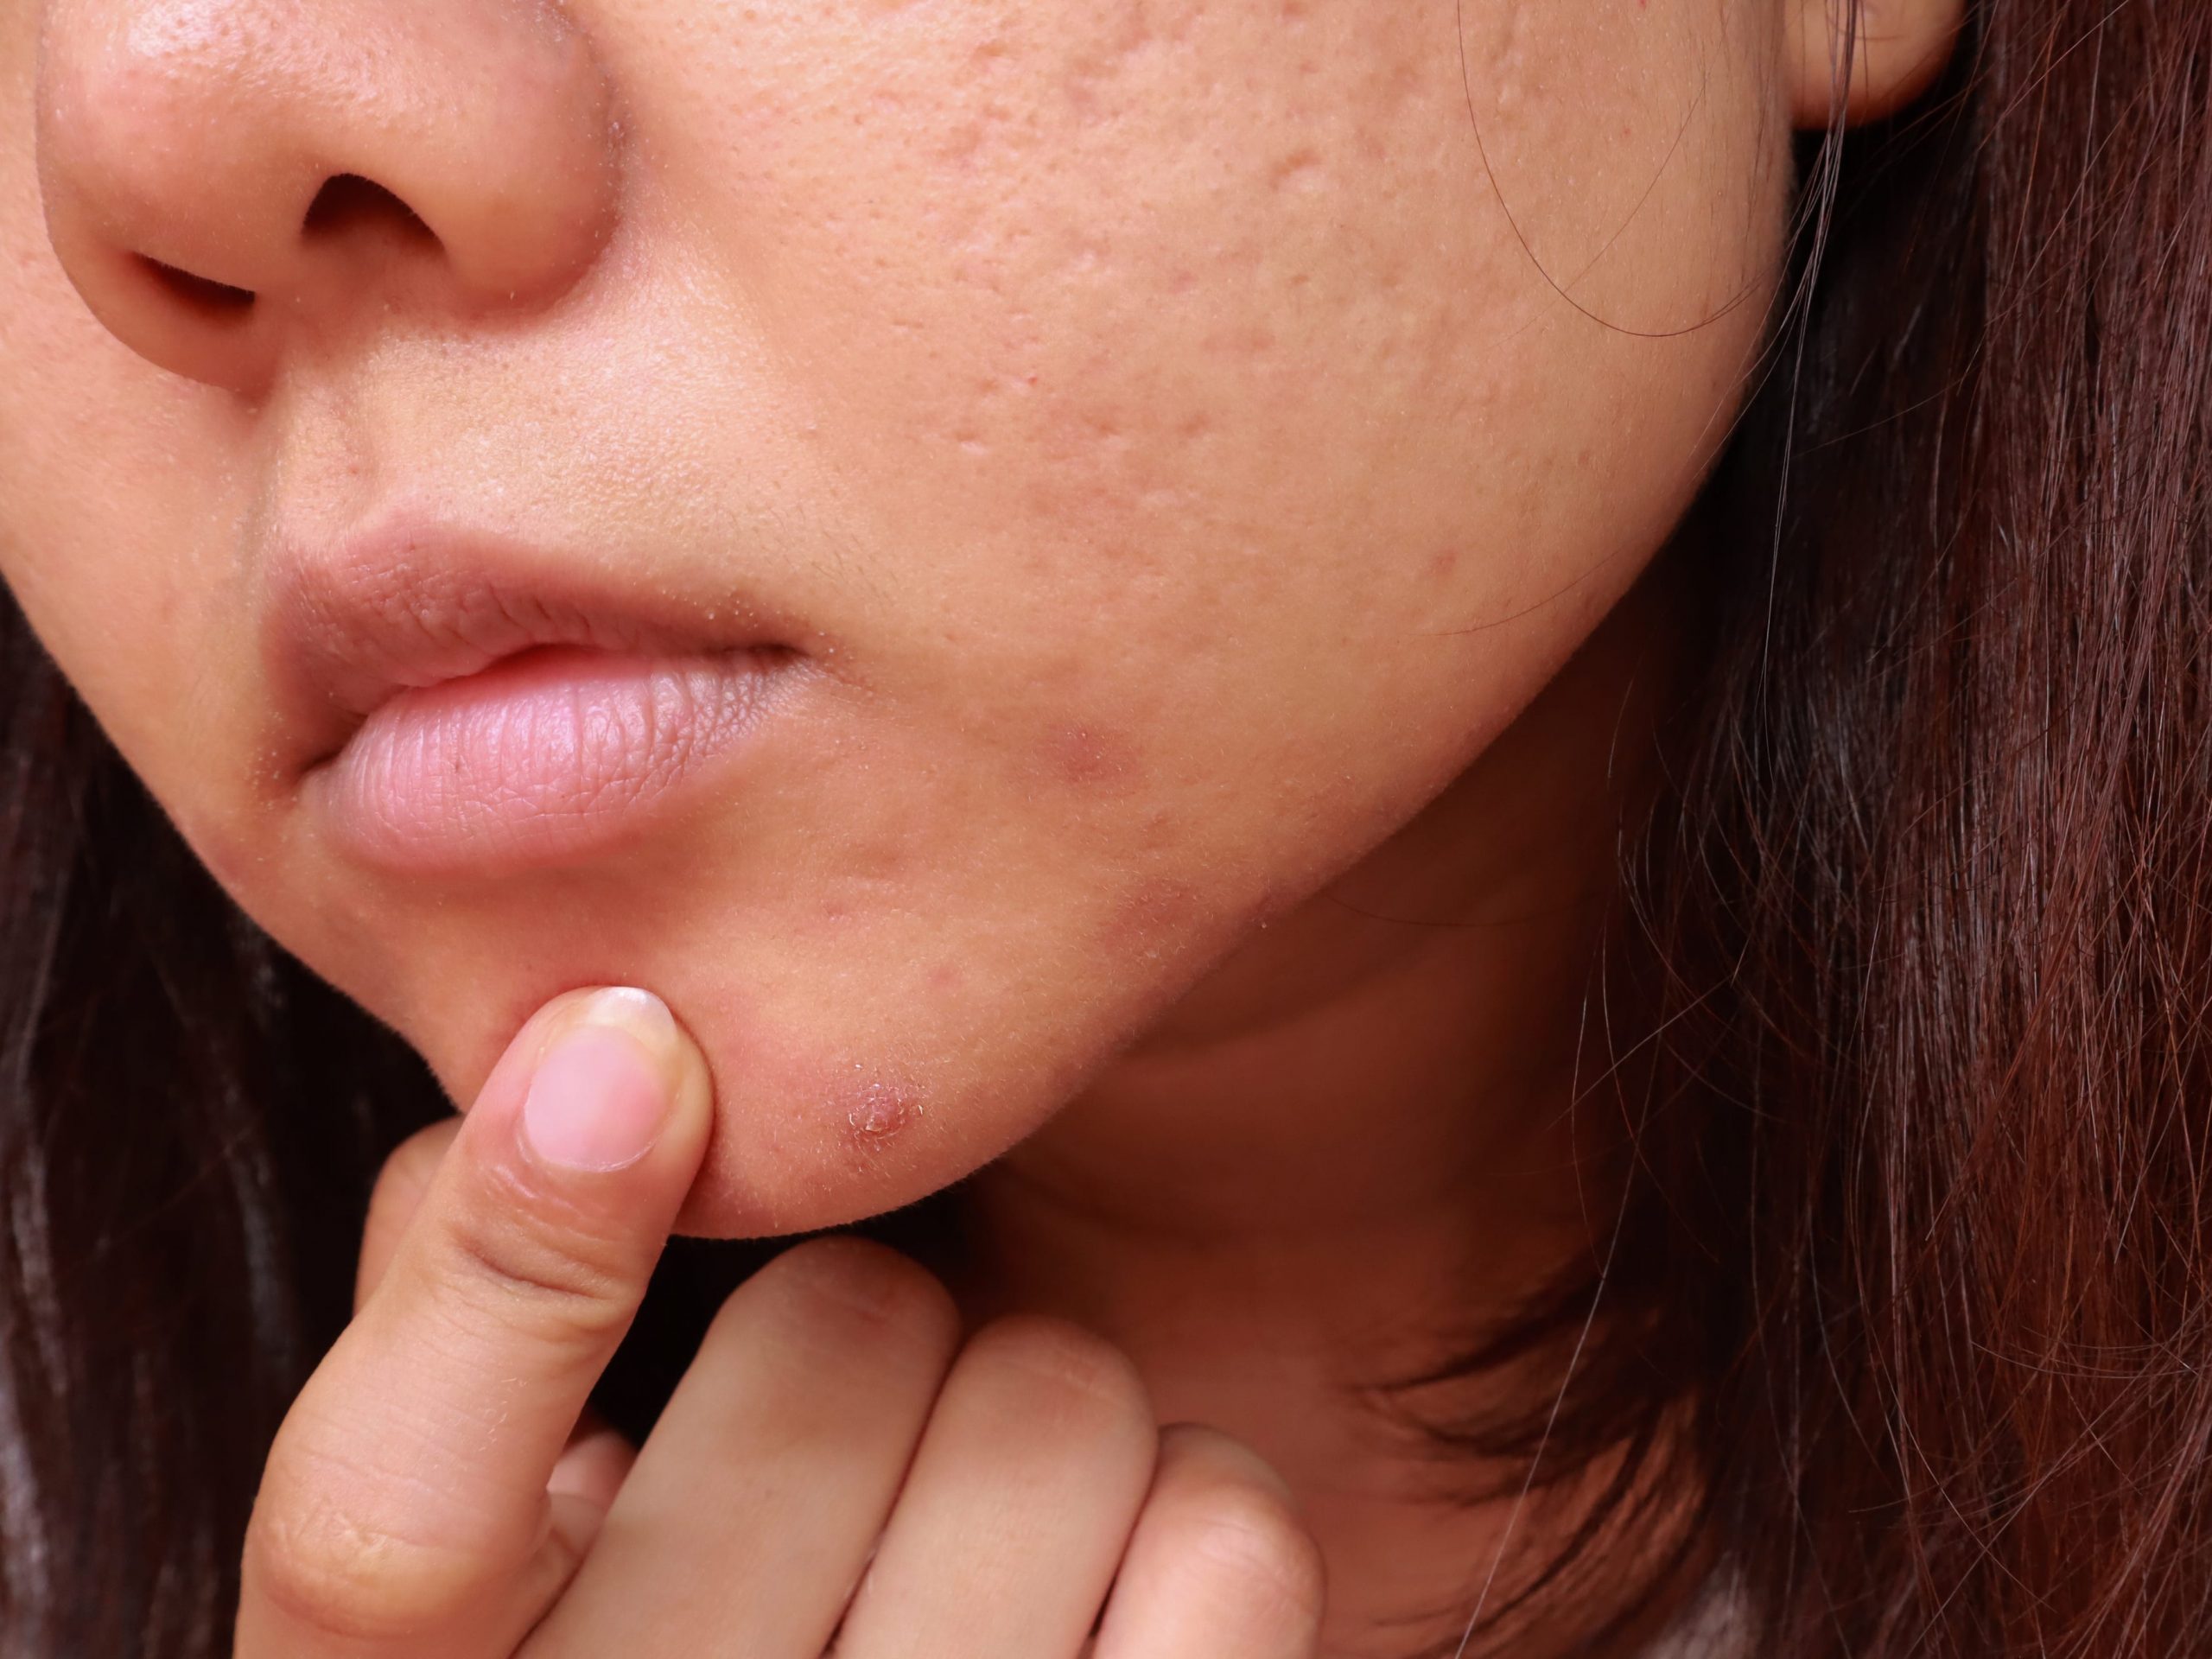 you shouldn't your pimple, and when it's OK, according to dermatologists